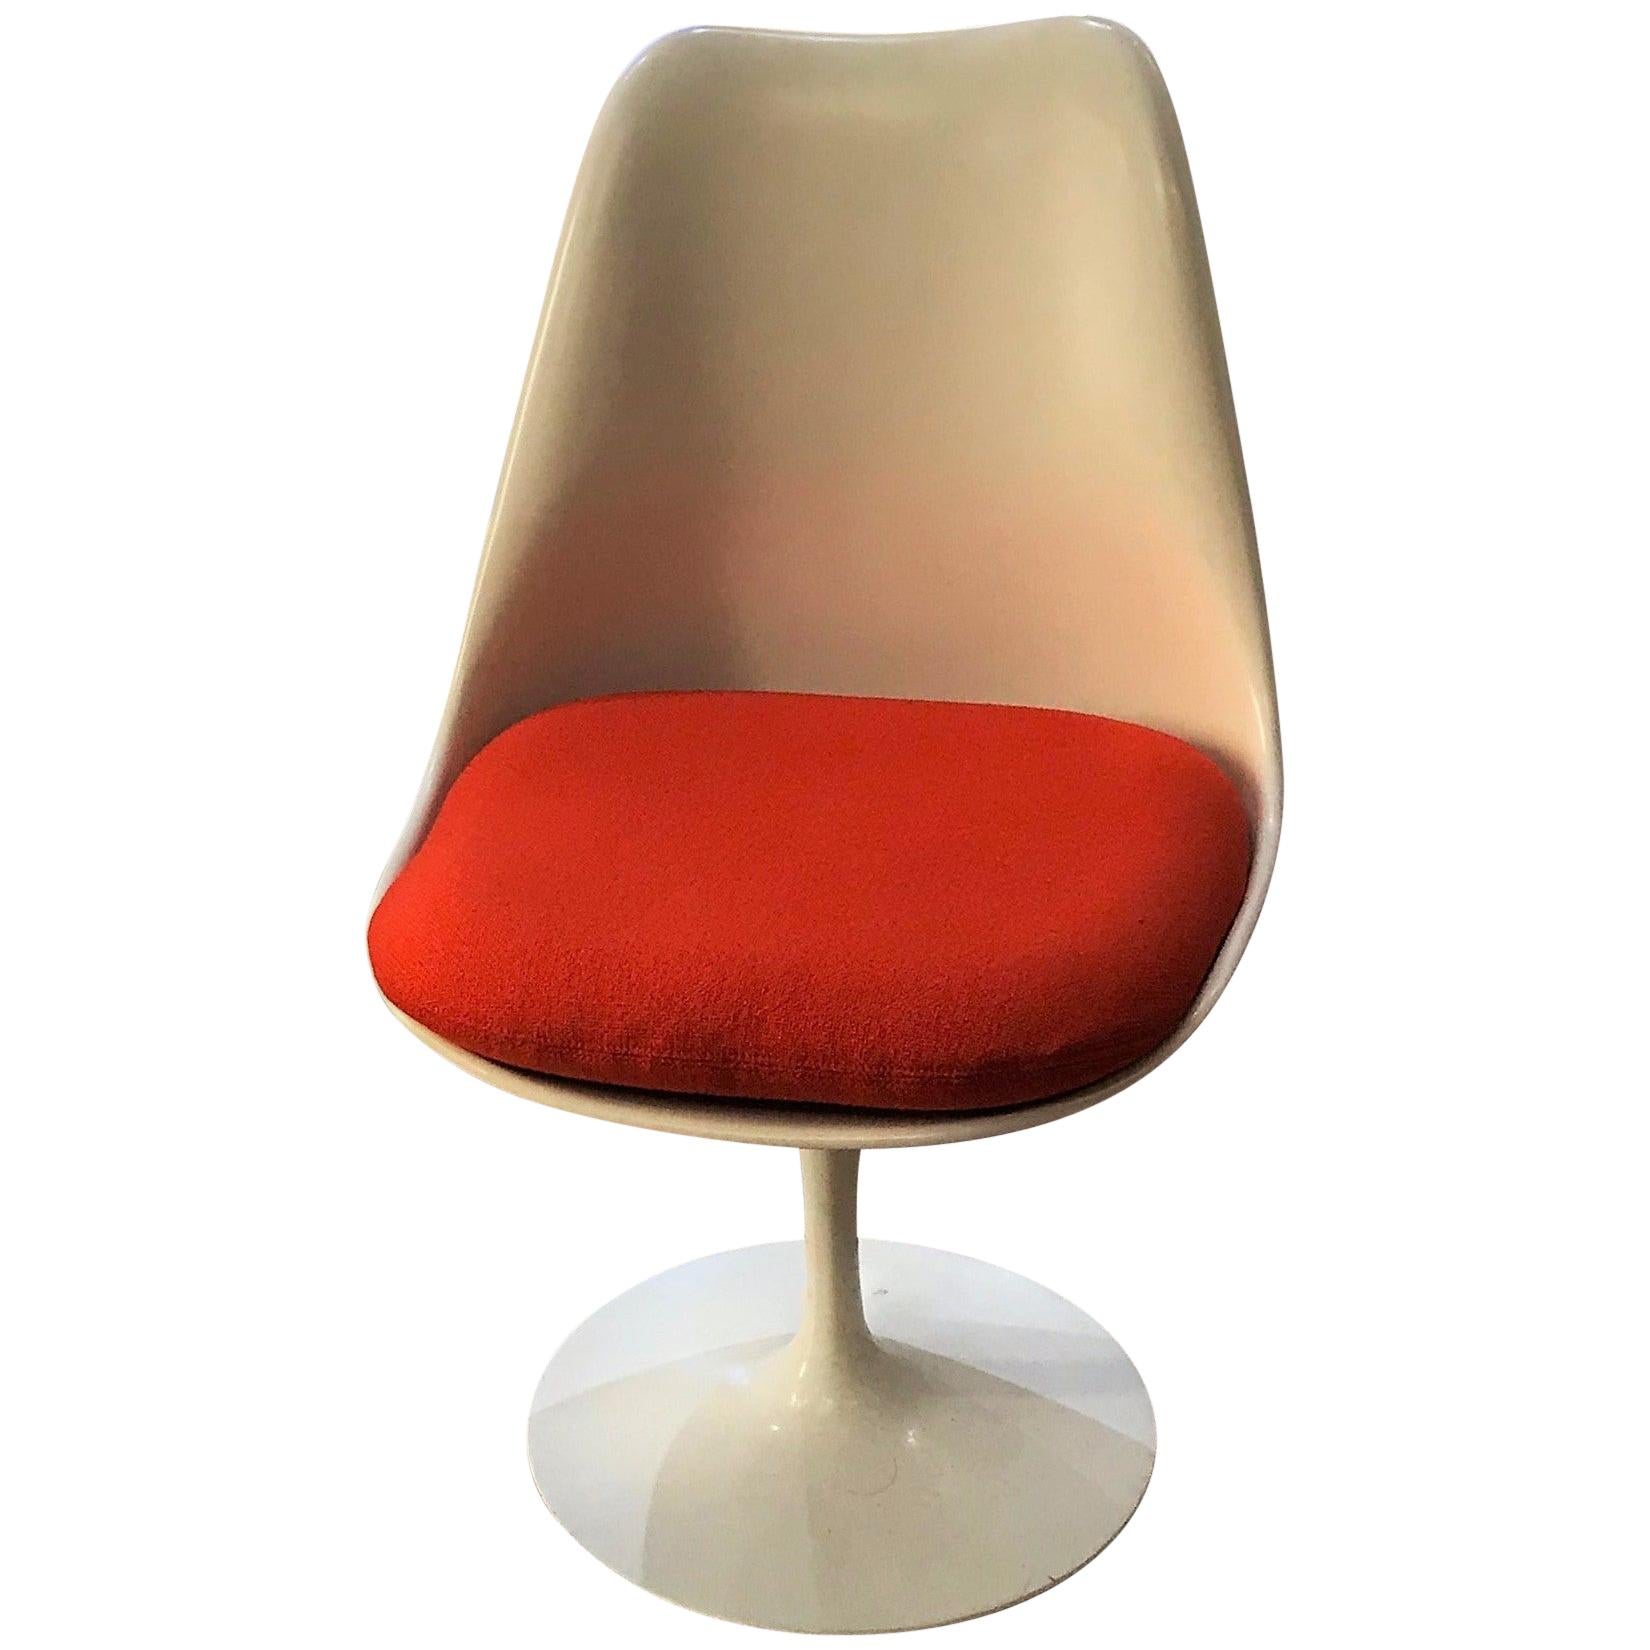 Chaise Tulipe, Tulip Chair, Saarinen and Knoll, Pivotante For Sale at  1stDibs | chaise knoll tulipe, chaises saarinen, chaise tulipe pivotant